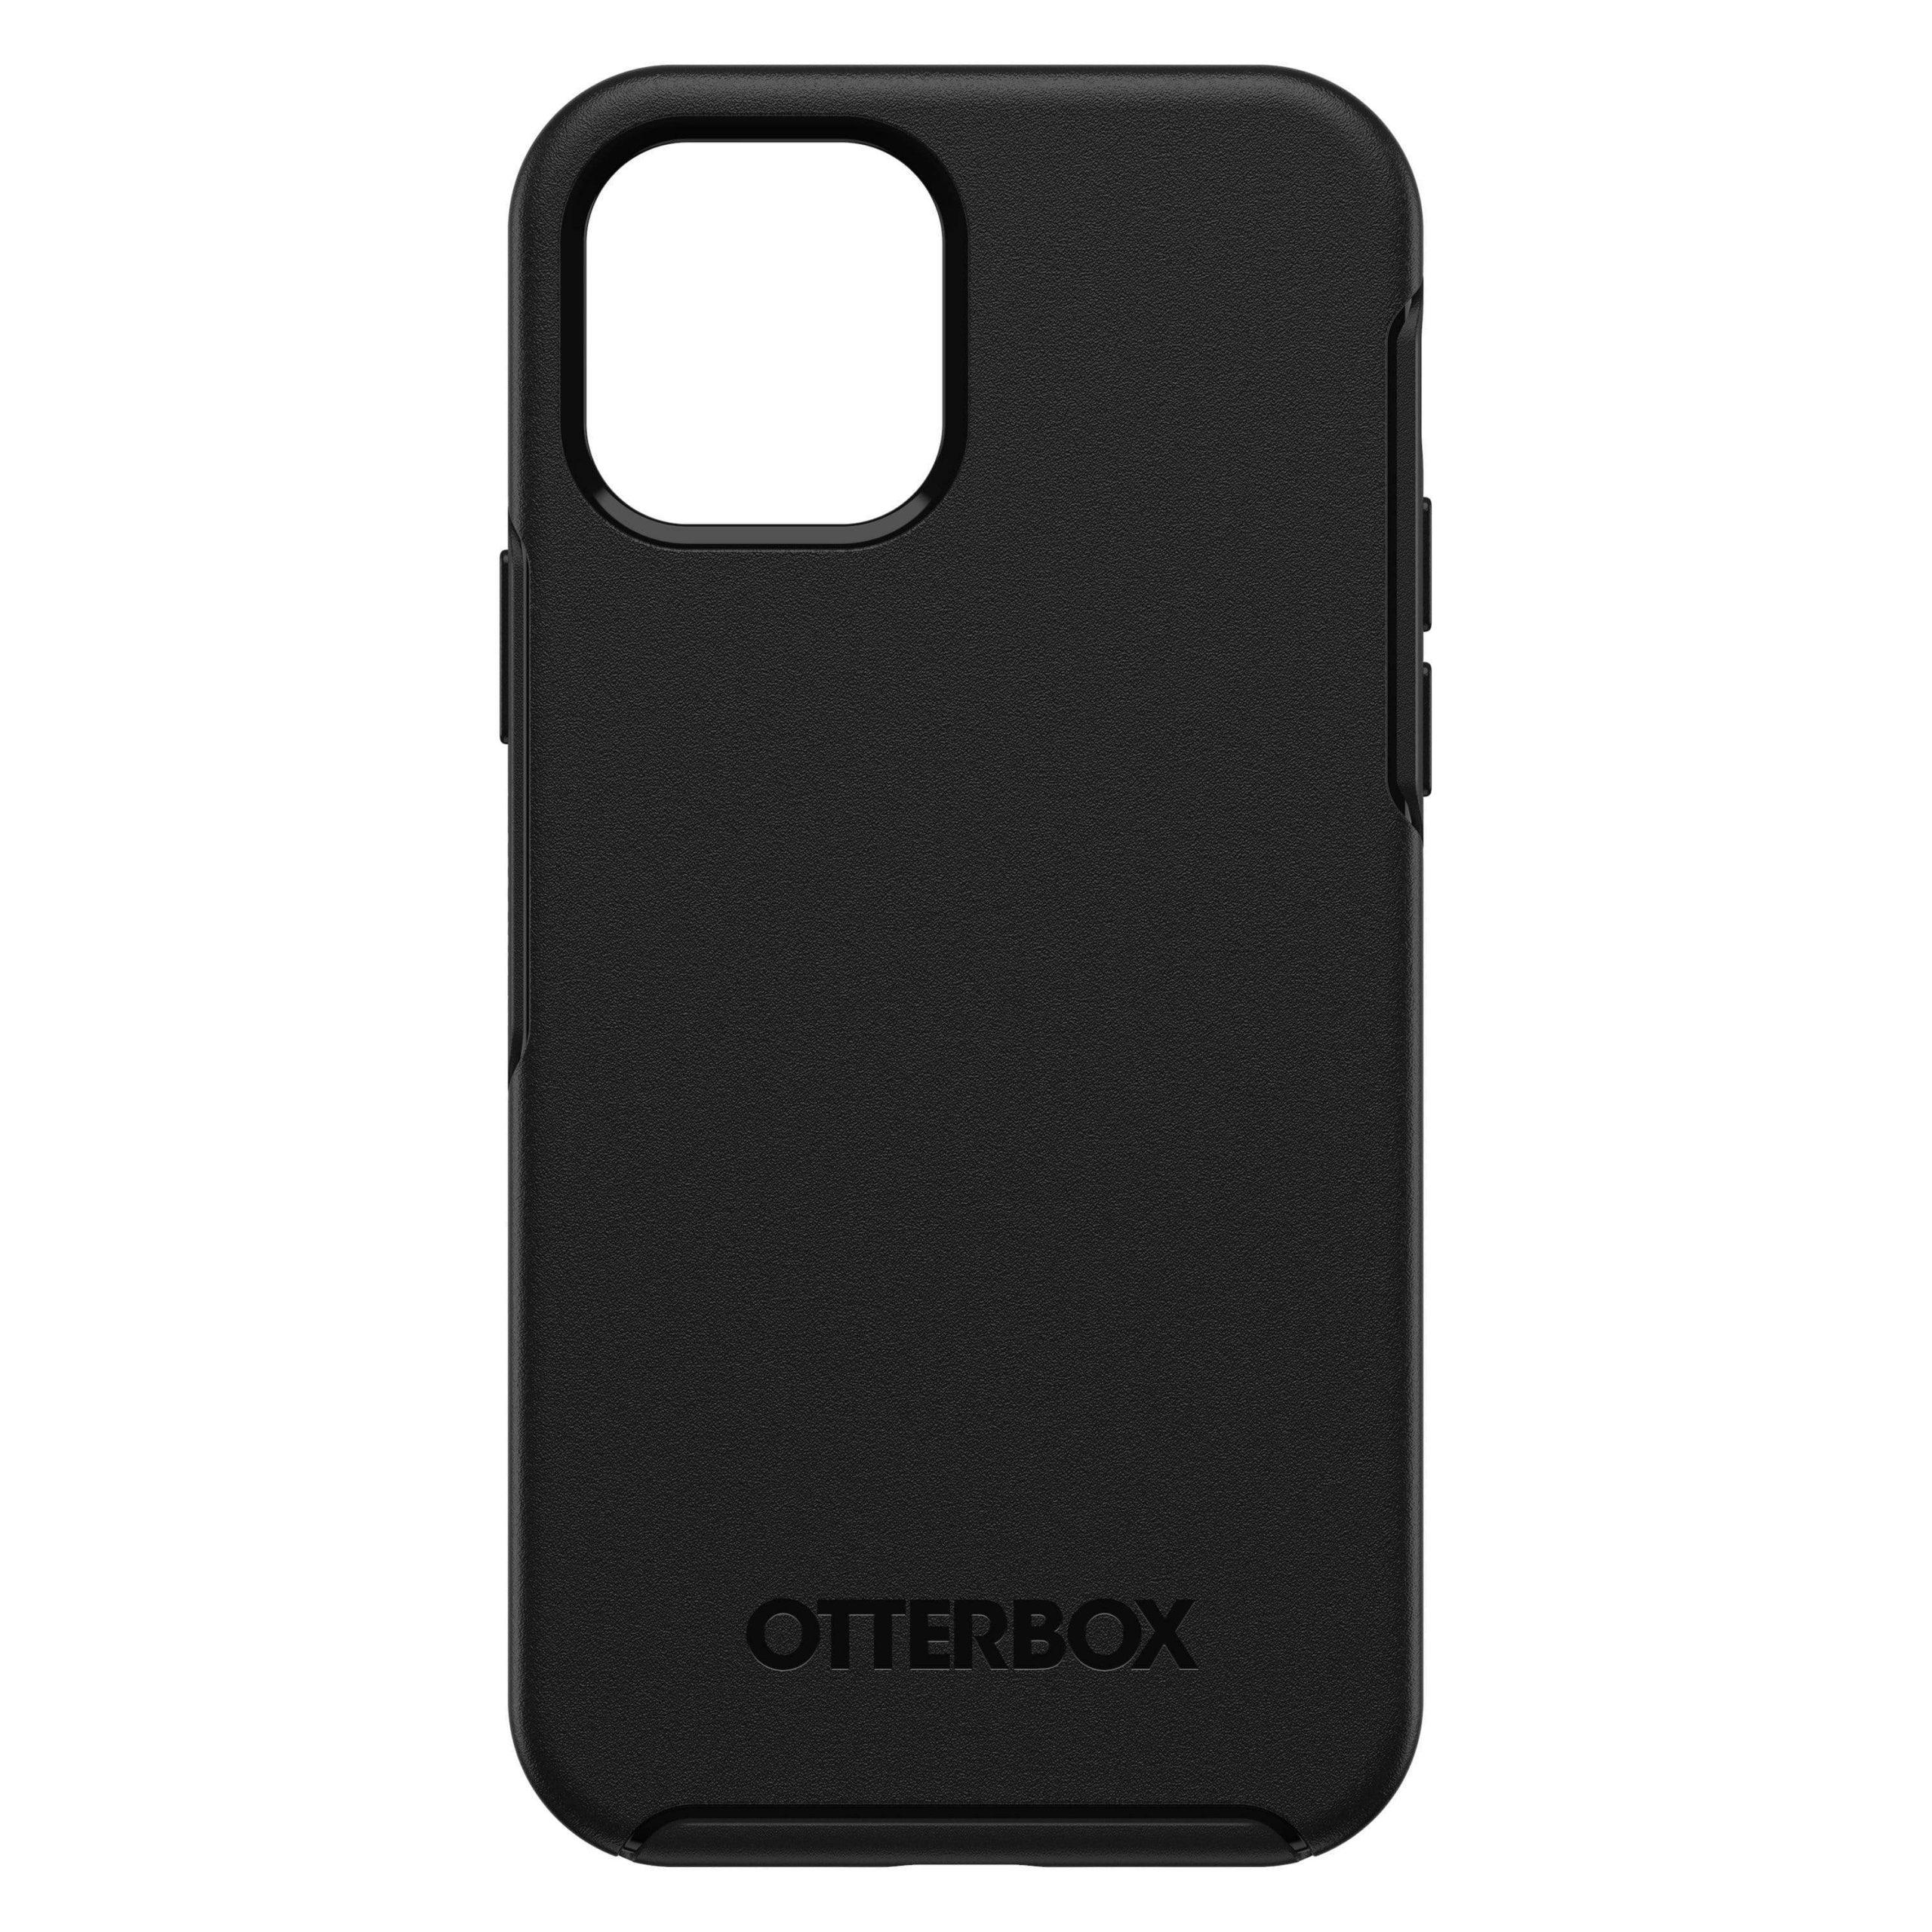 otterbox apple iphone 12 12 pro symmetry case slim and lightweight cover w anti microbial and military grade drop protection wireless charging compatible black